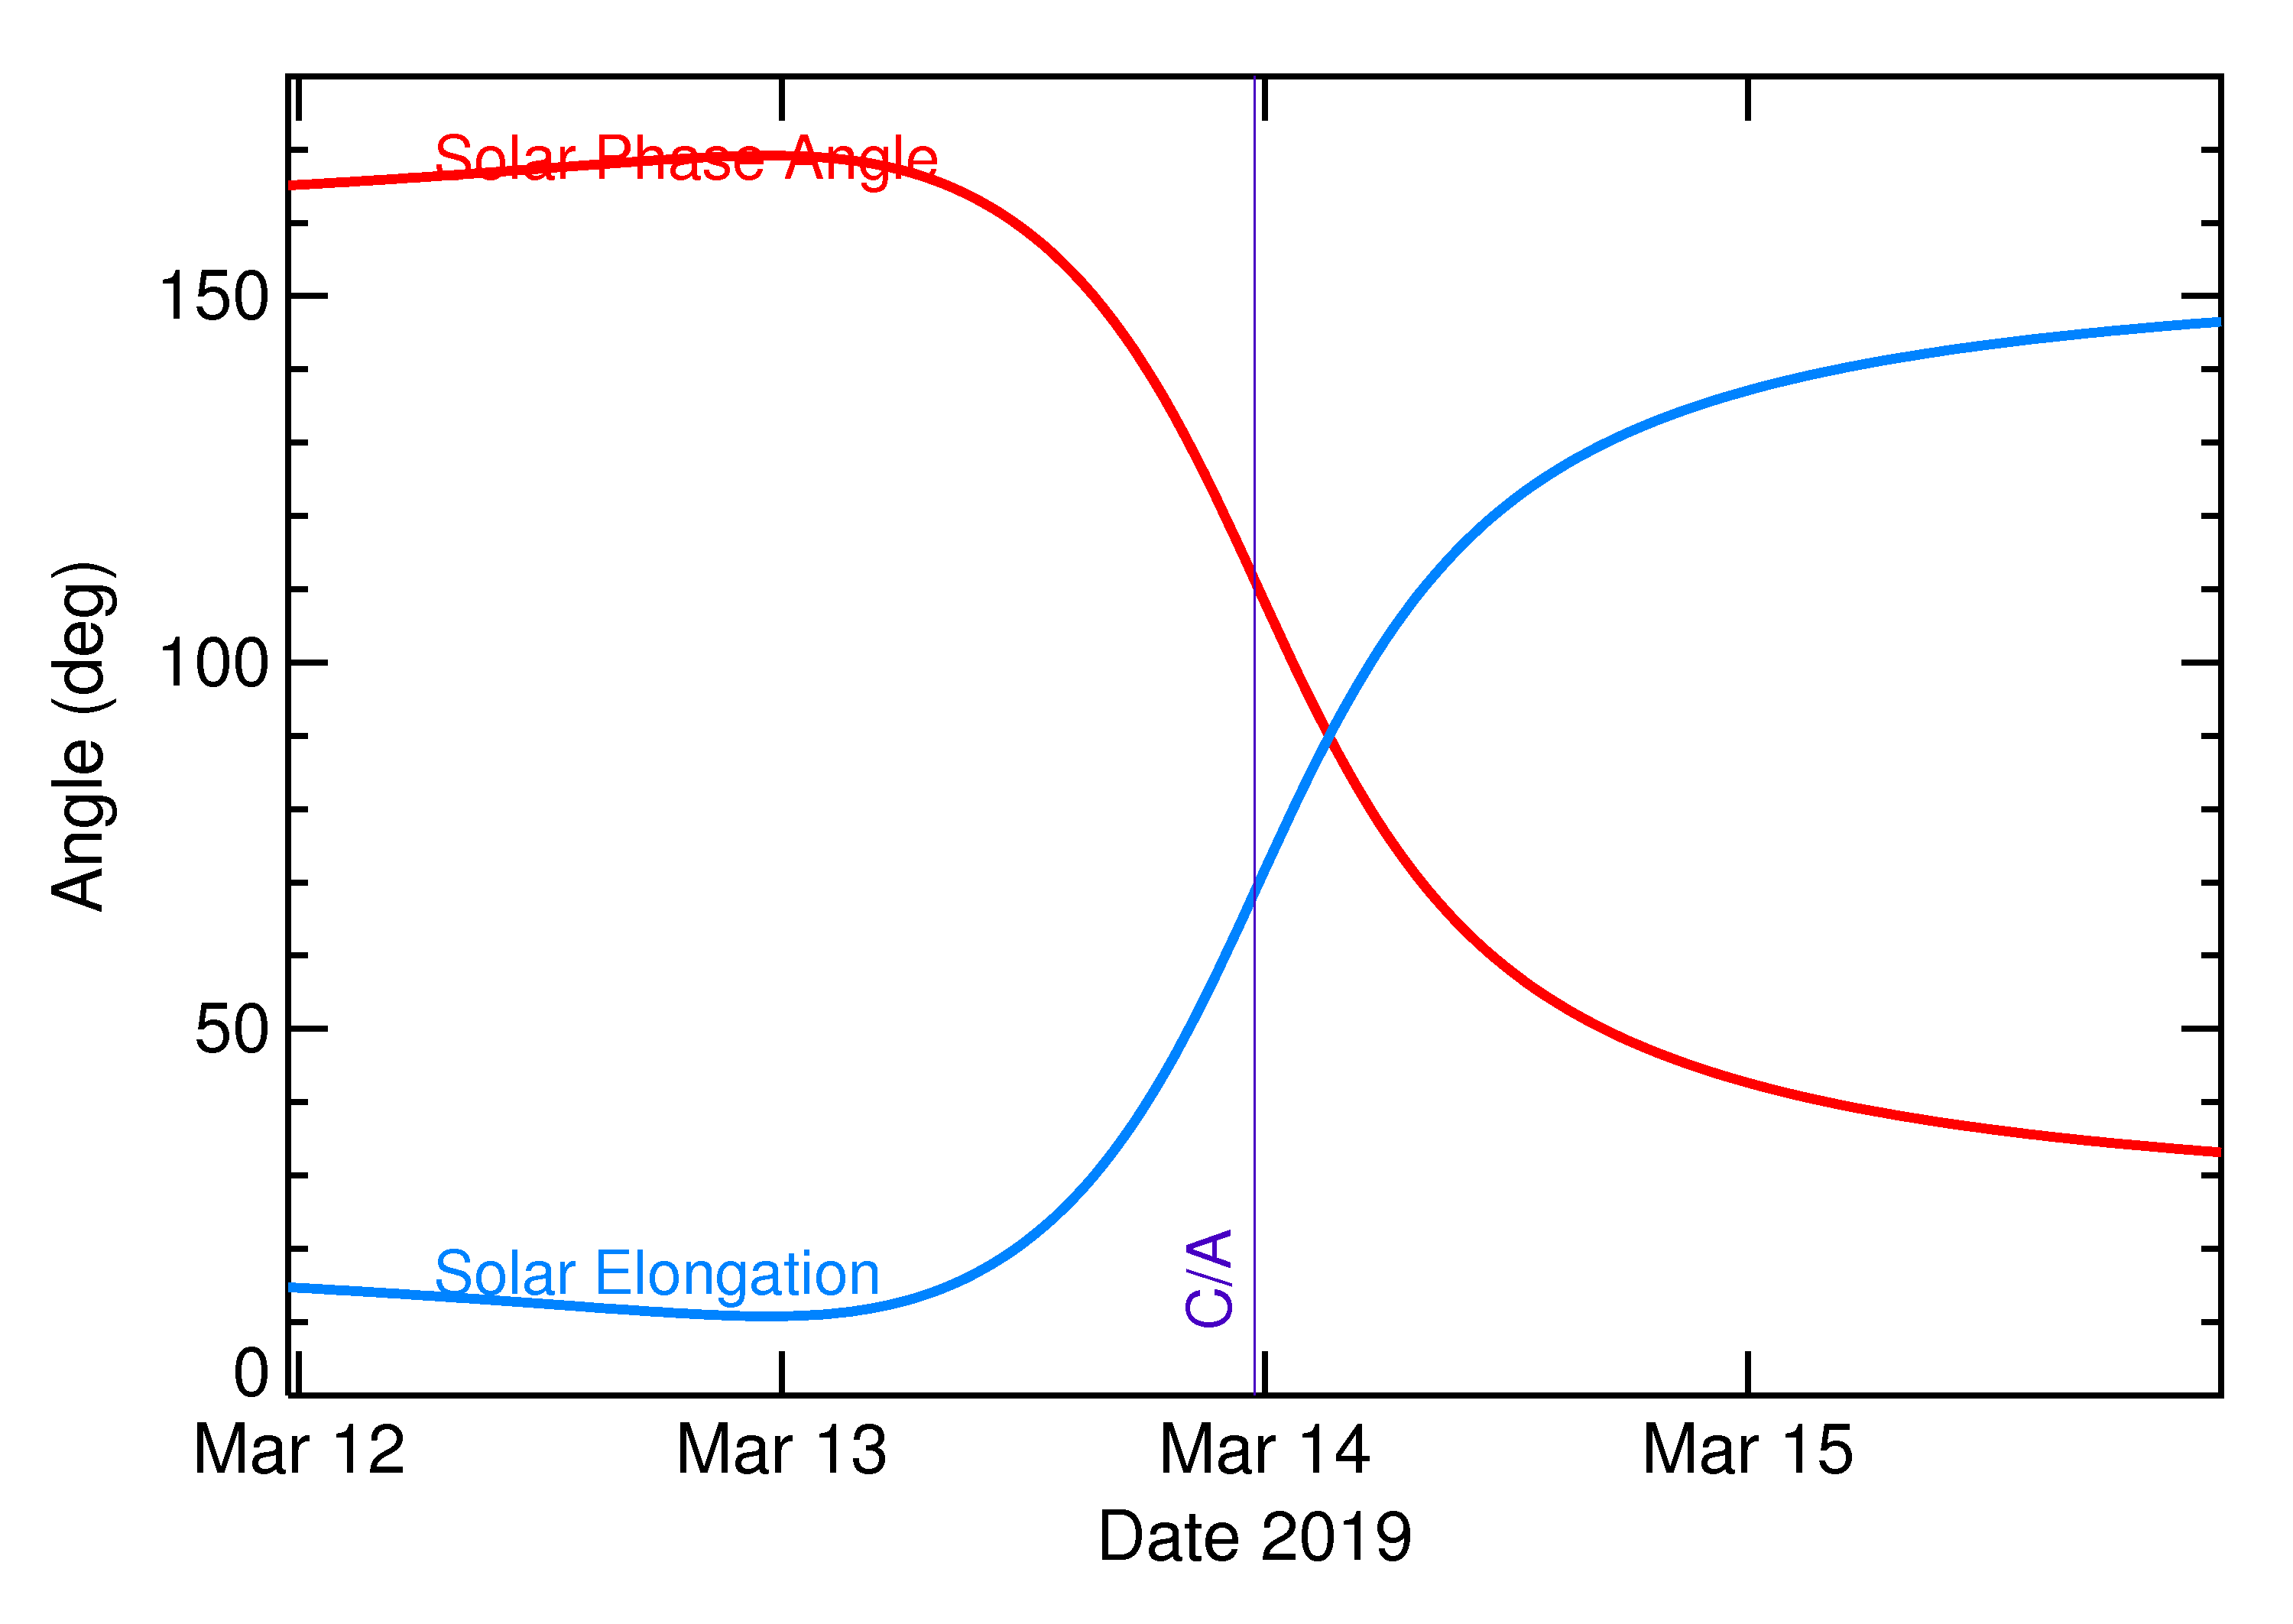 Solar Elongation and Solar Phase Angle of 2019 EN2 in the days around closest approach